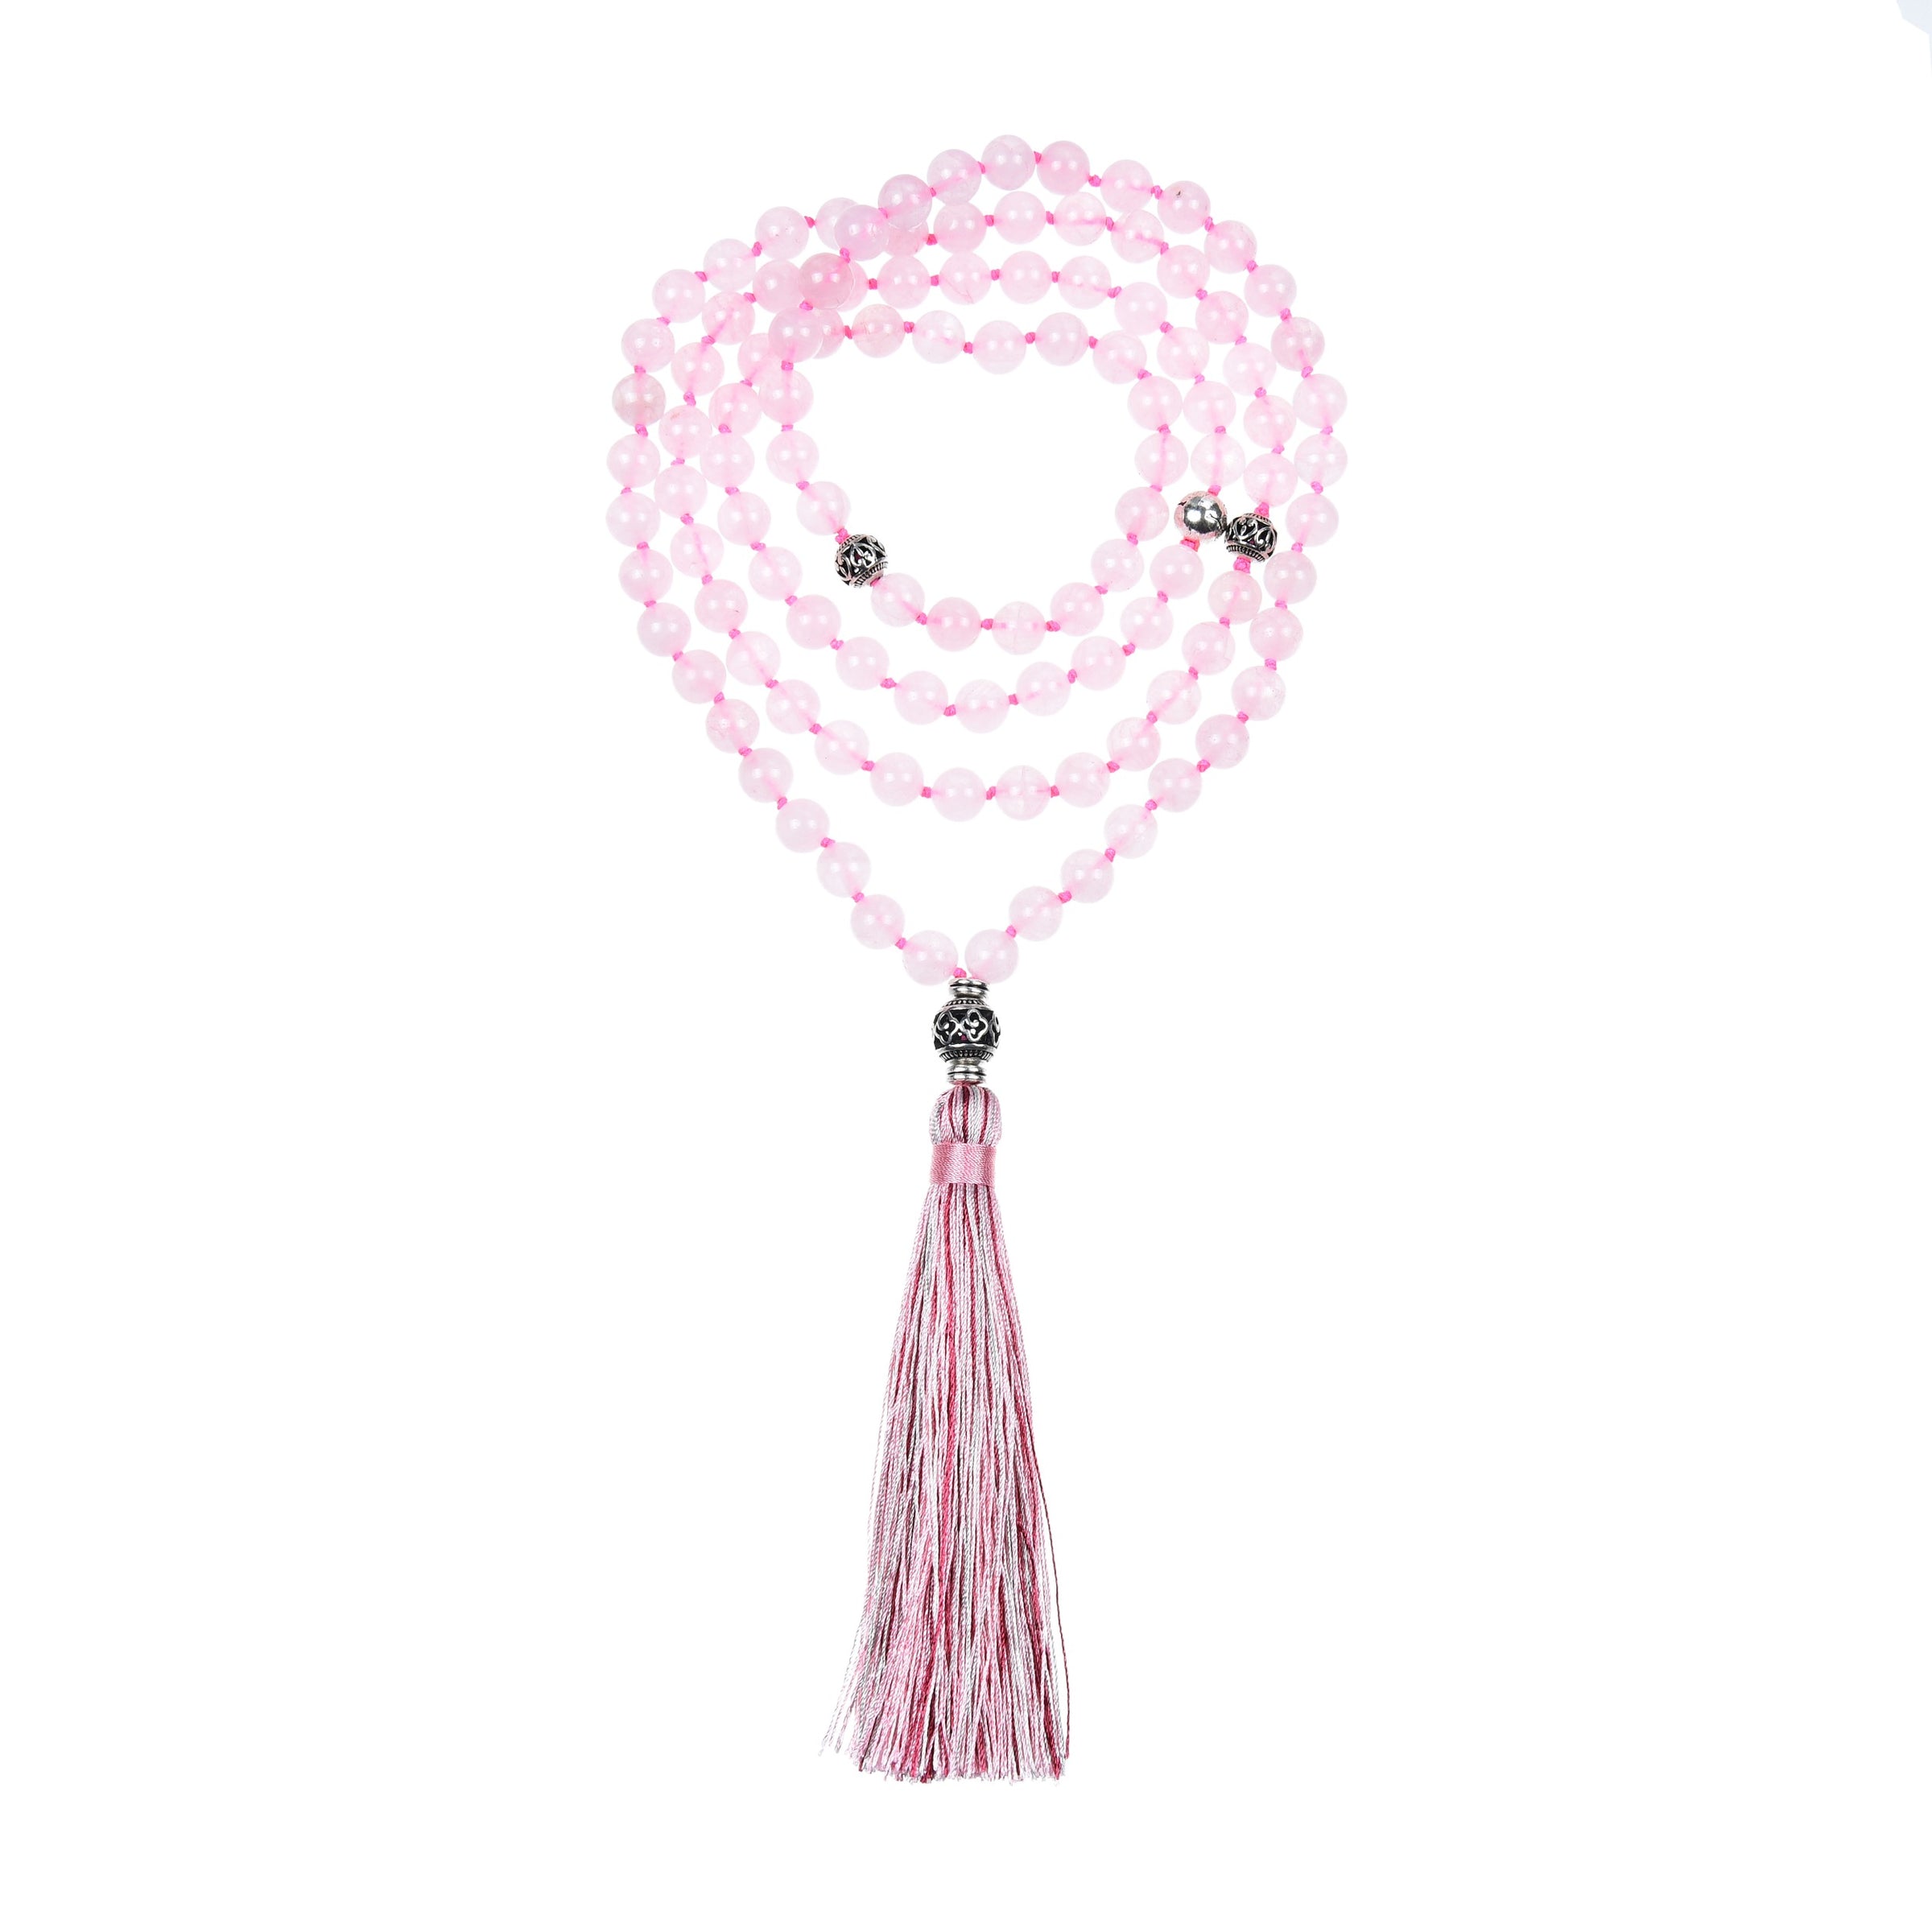 Mala Necklace  108 Hand-Knotted 8mm Round Beads (Rose Quartz) – Cherry  Tree Collection